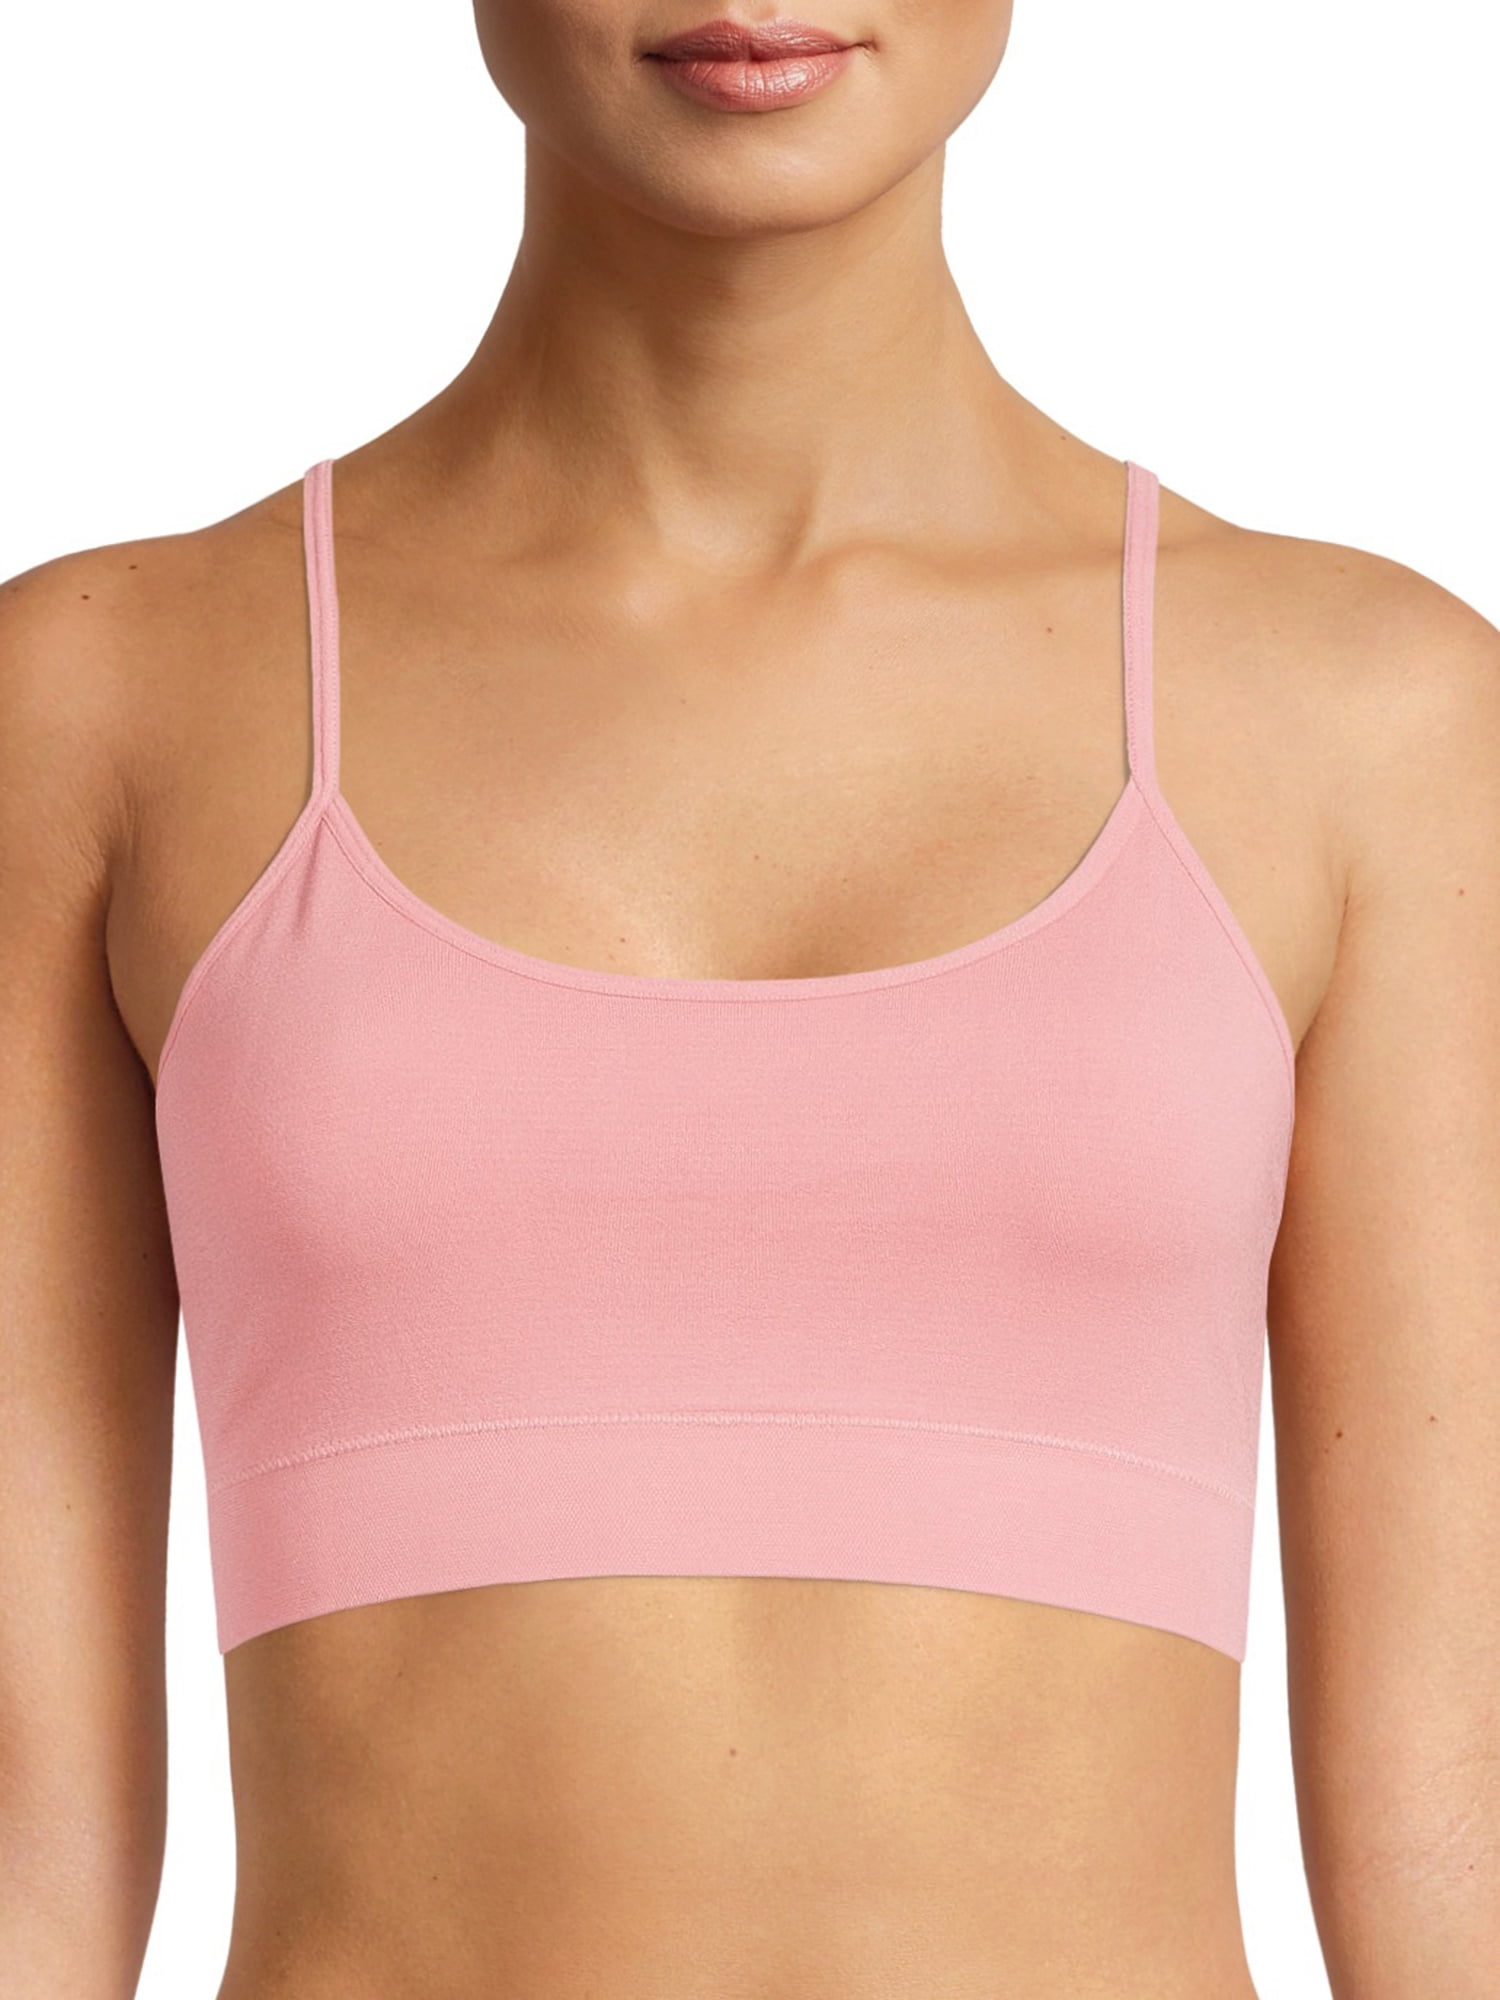 Women's Seamless Medium Support Cami Midline Sports Bra - All In Motion™  Pink XS 1 ct